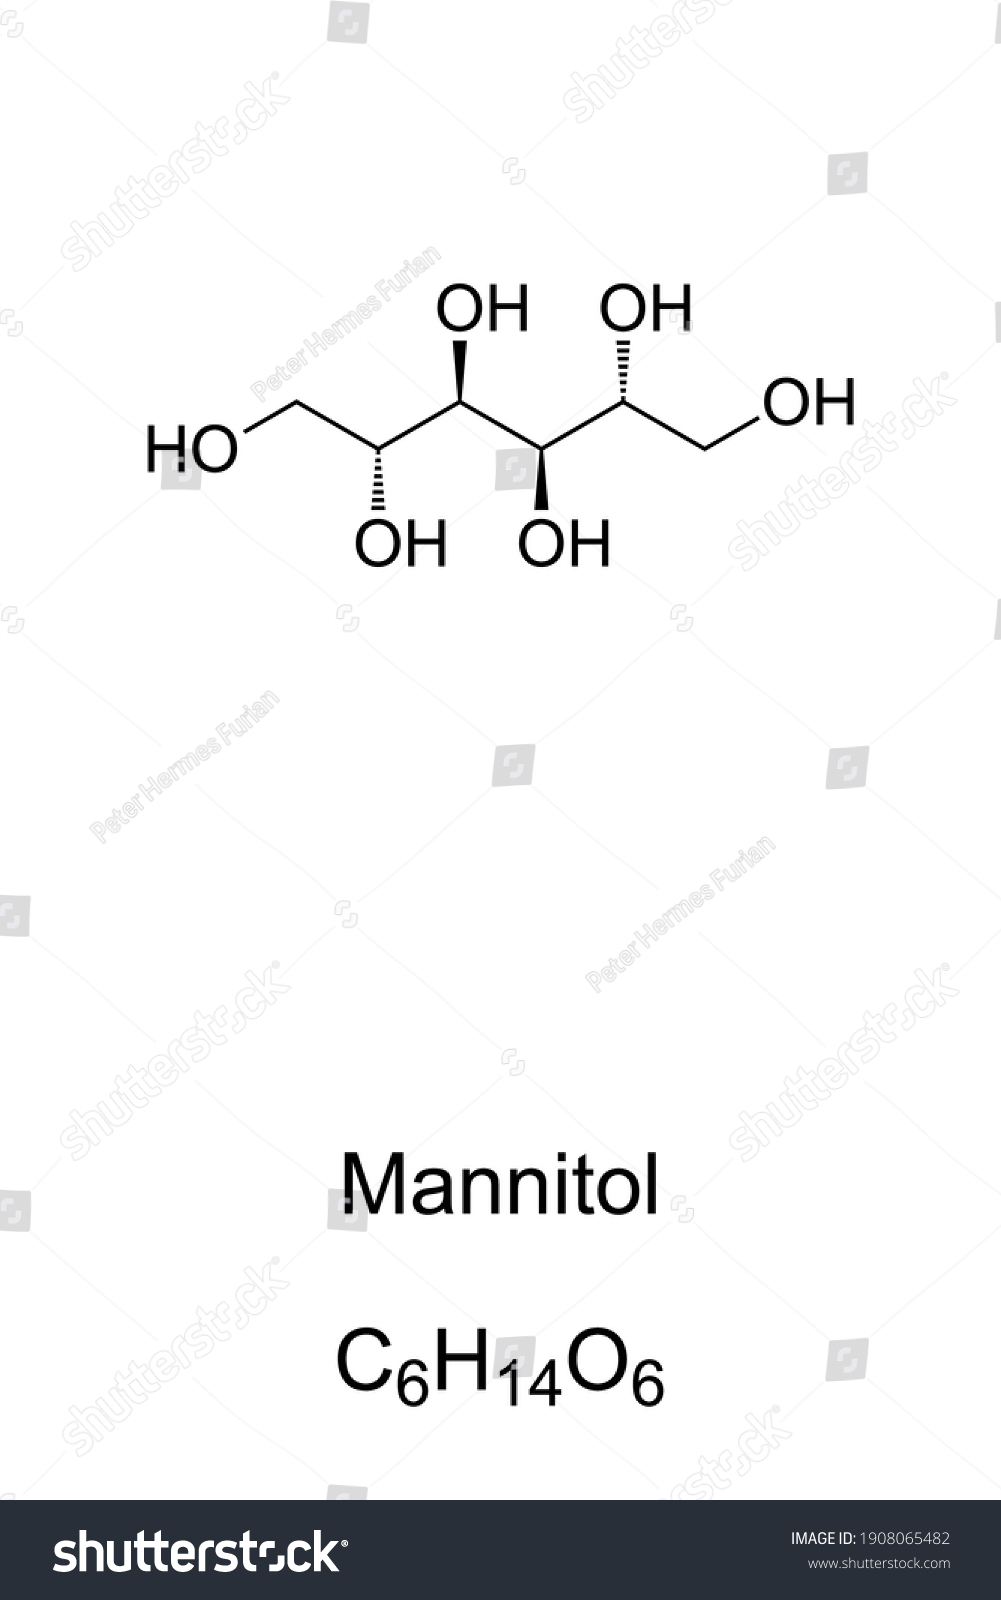 SVG of Mannitol, chemical formula and skeletal structure. D-Mannitol, mannite or manna sugar. Isomer of sorbitol, used as sweetener in diabetic food and medication to decrease pressure in eyes. E421. Vector. svg